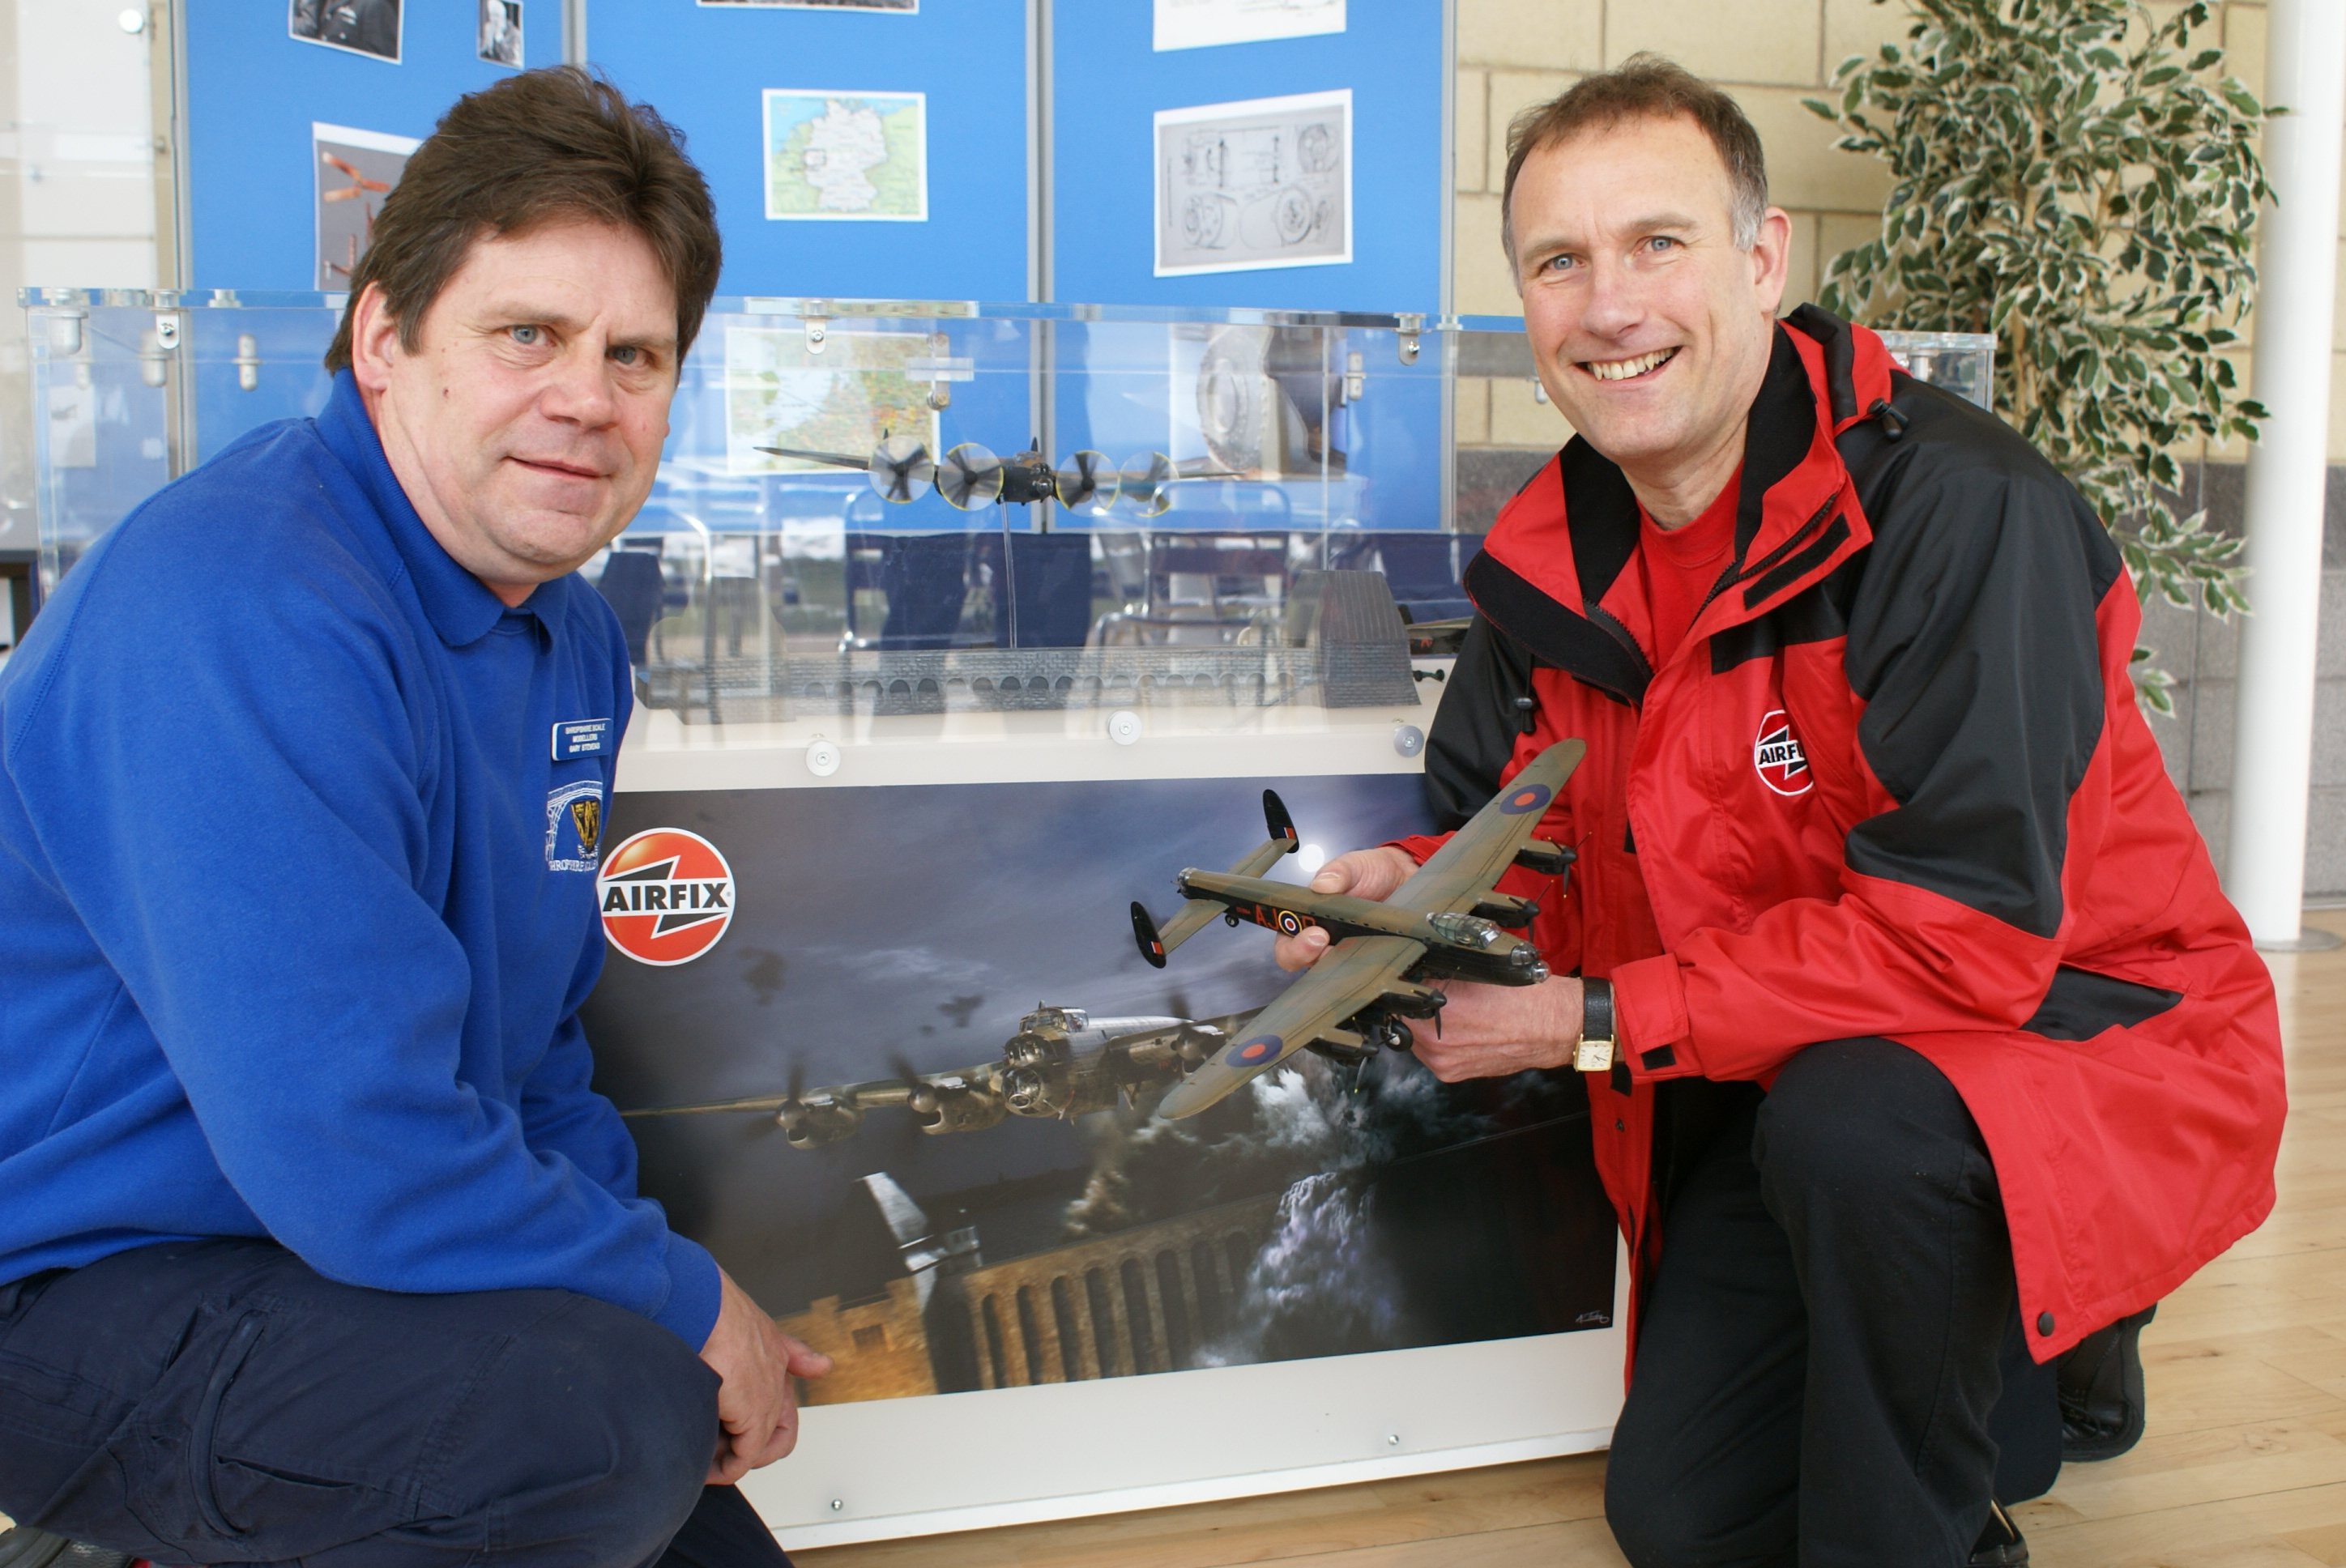 Gary Stevens of the Shropshire Scale Modellers and Darrell Burge of Airfix pose with model of Avro Lancaster.